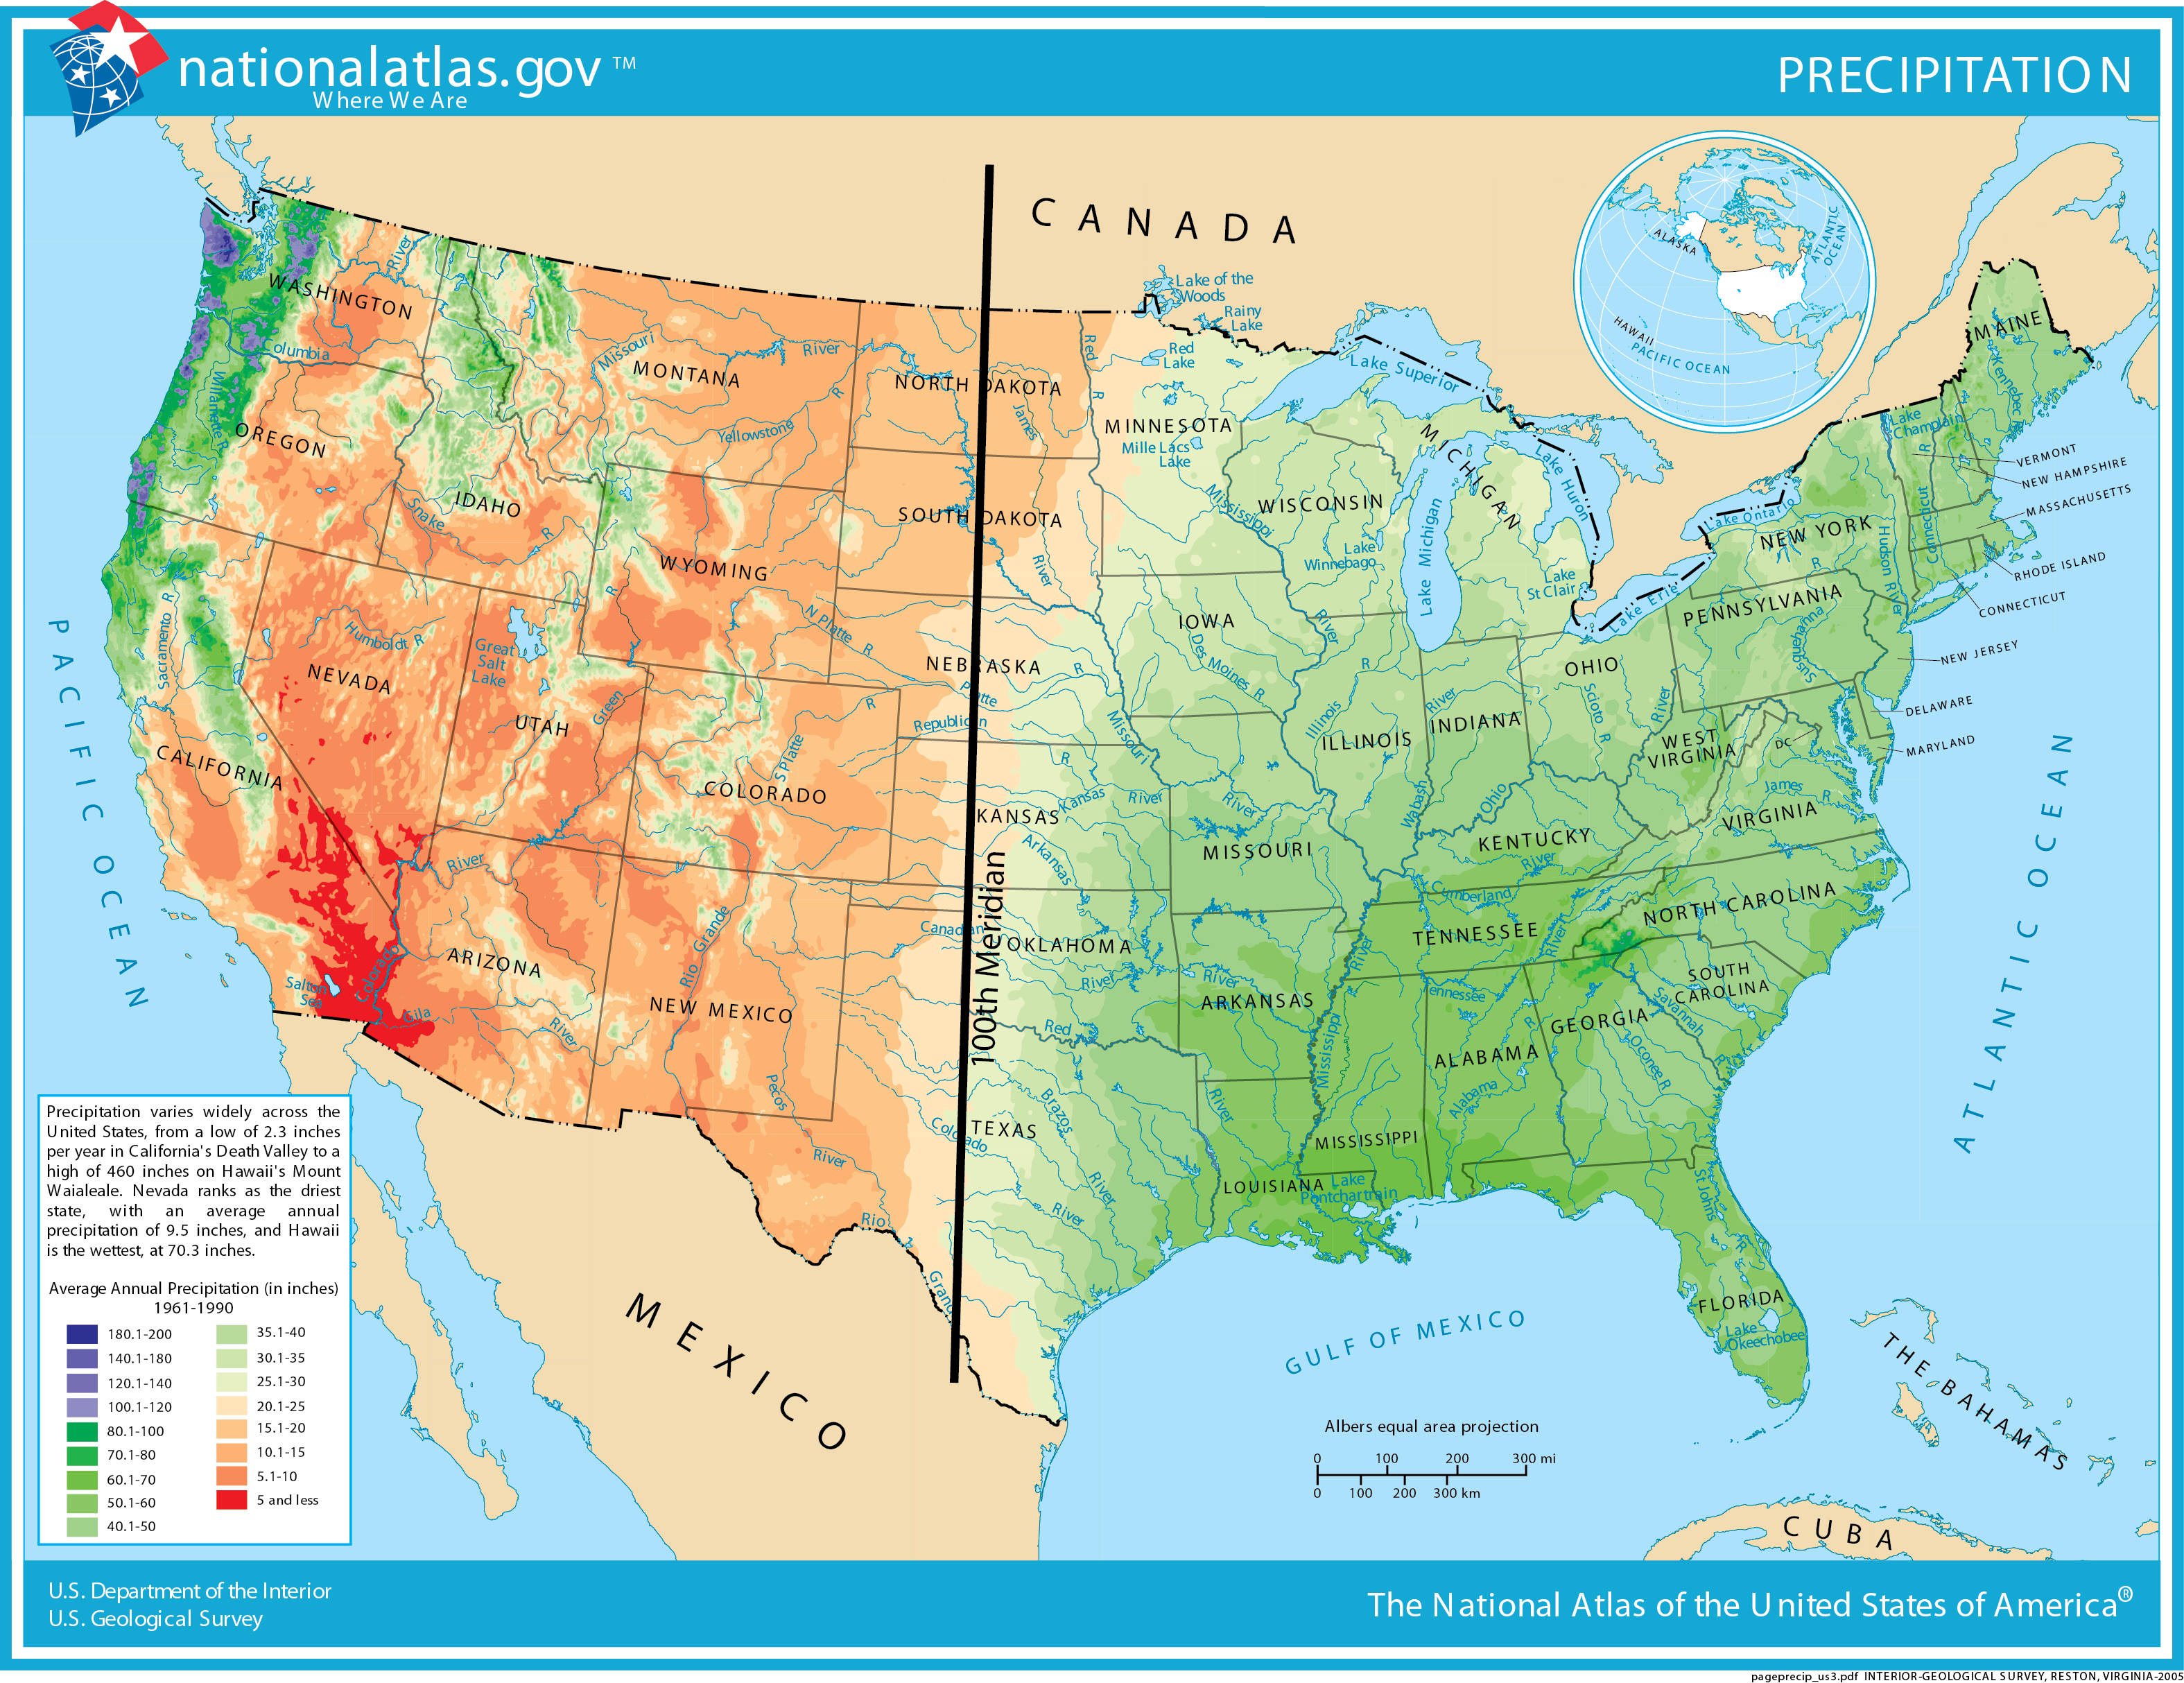 Map of the United States showing distribution of precipitation in the United States. The western half of the United States is much drier than the eastern half of the United States with the exception of the Pacific northwest which has abundant precipitation.